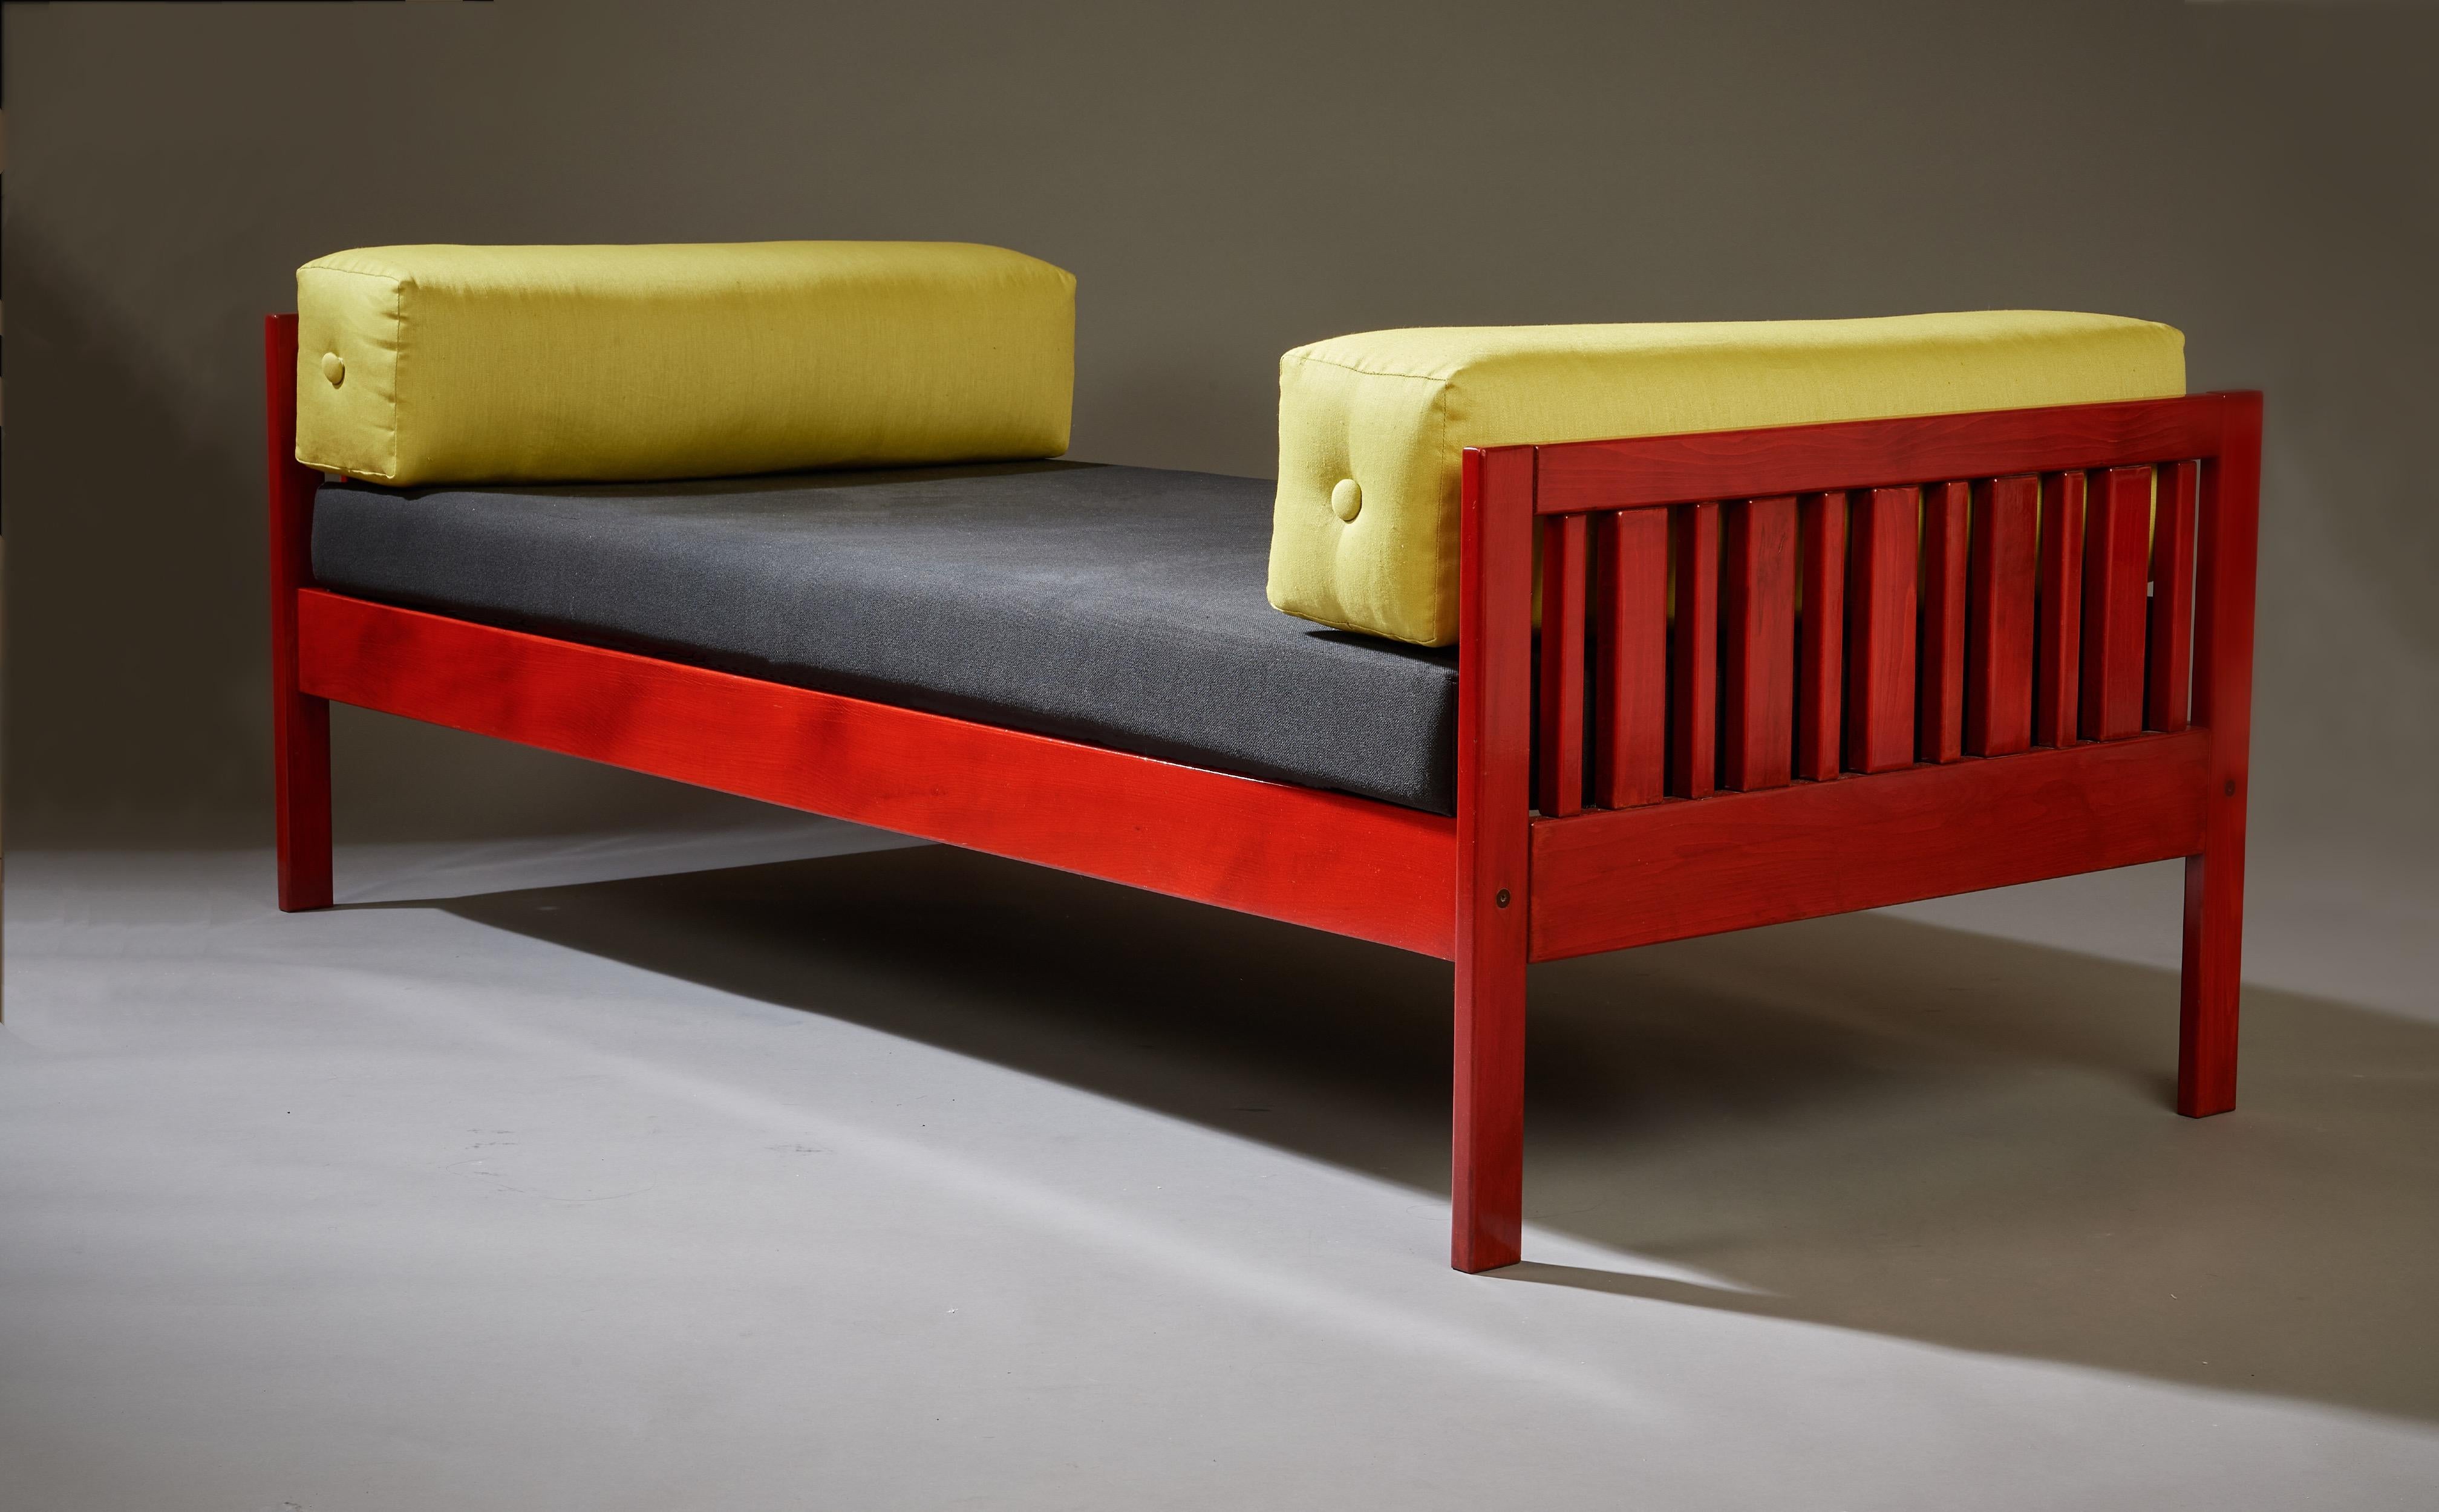 Mid-Century Modern Ettore Sottsass Daybed, Red Lacquered Wood, Chartreuse Upholstery, Italy c. 1962 For Sale